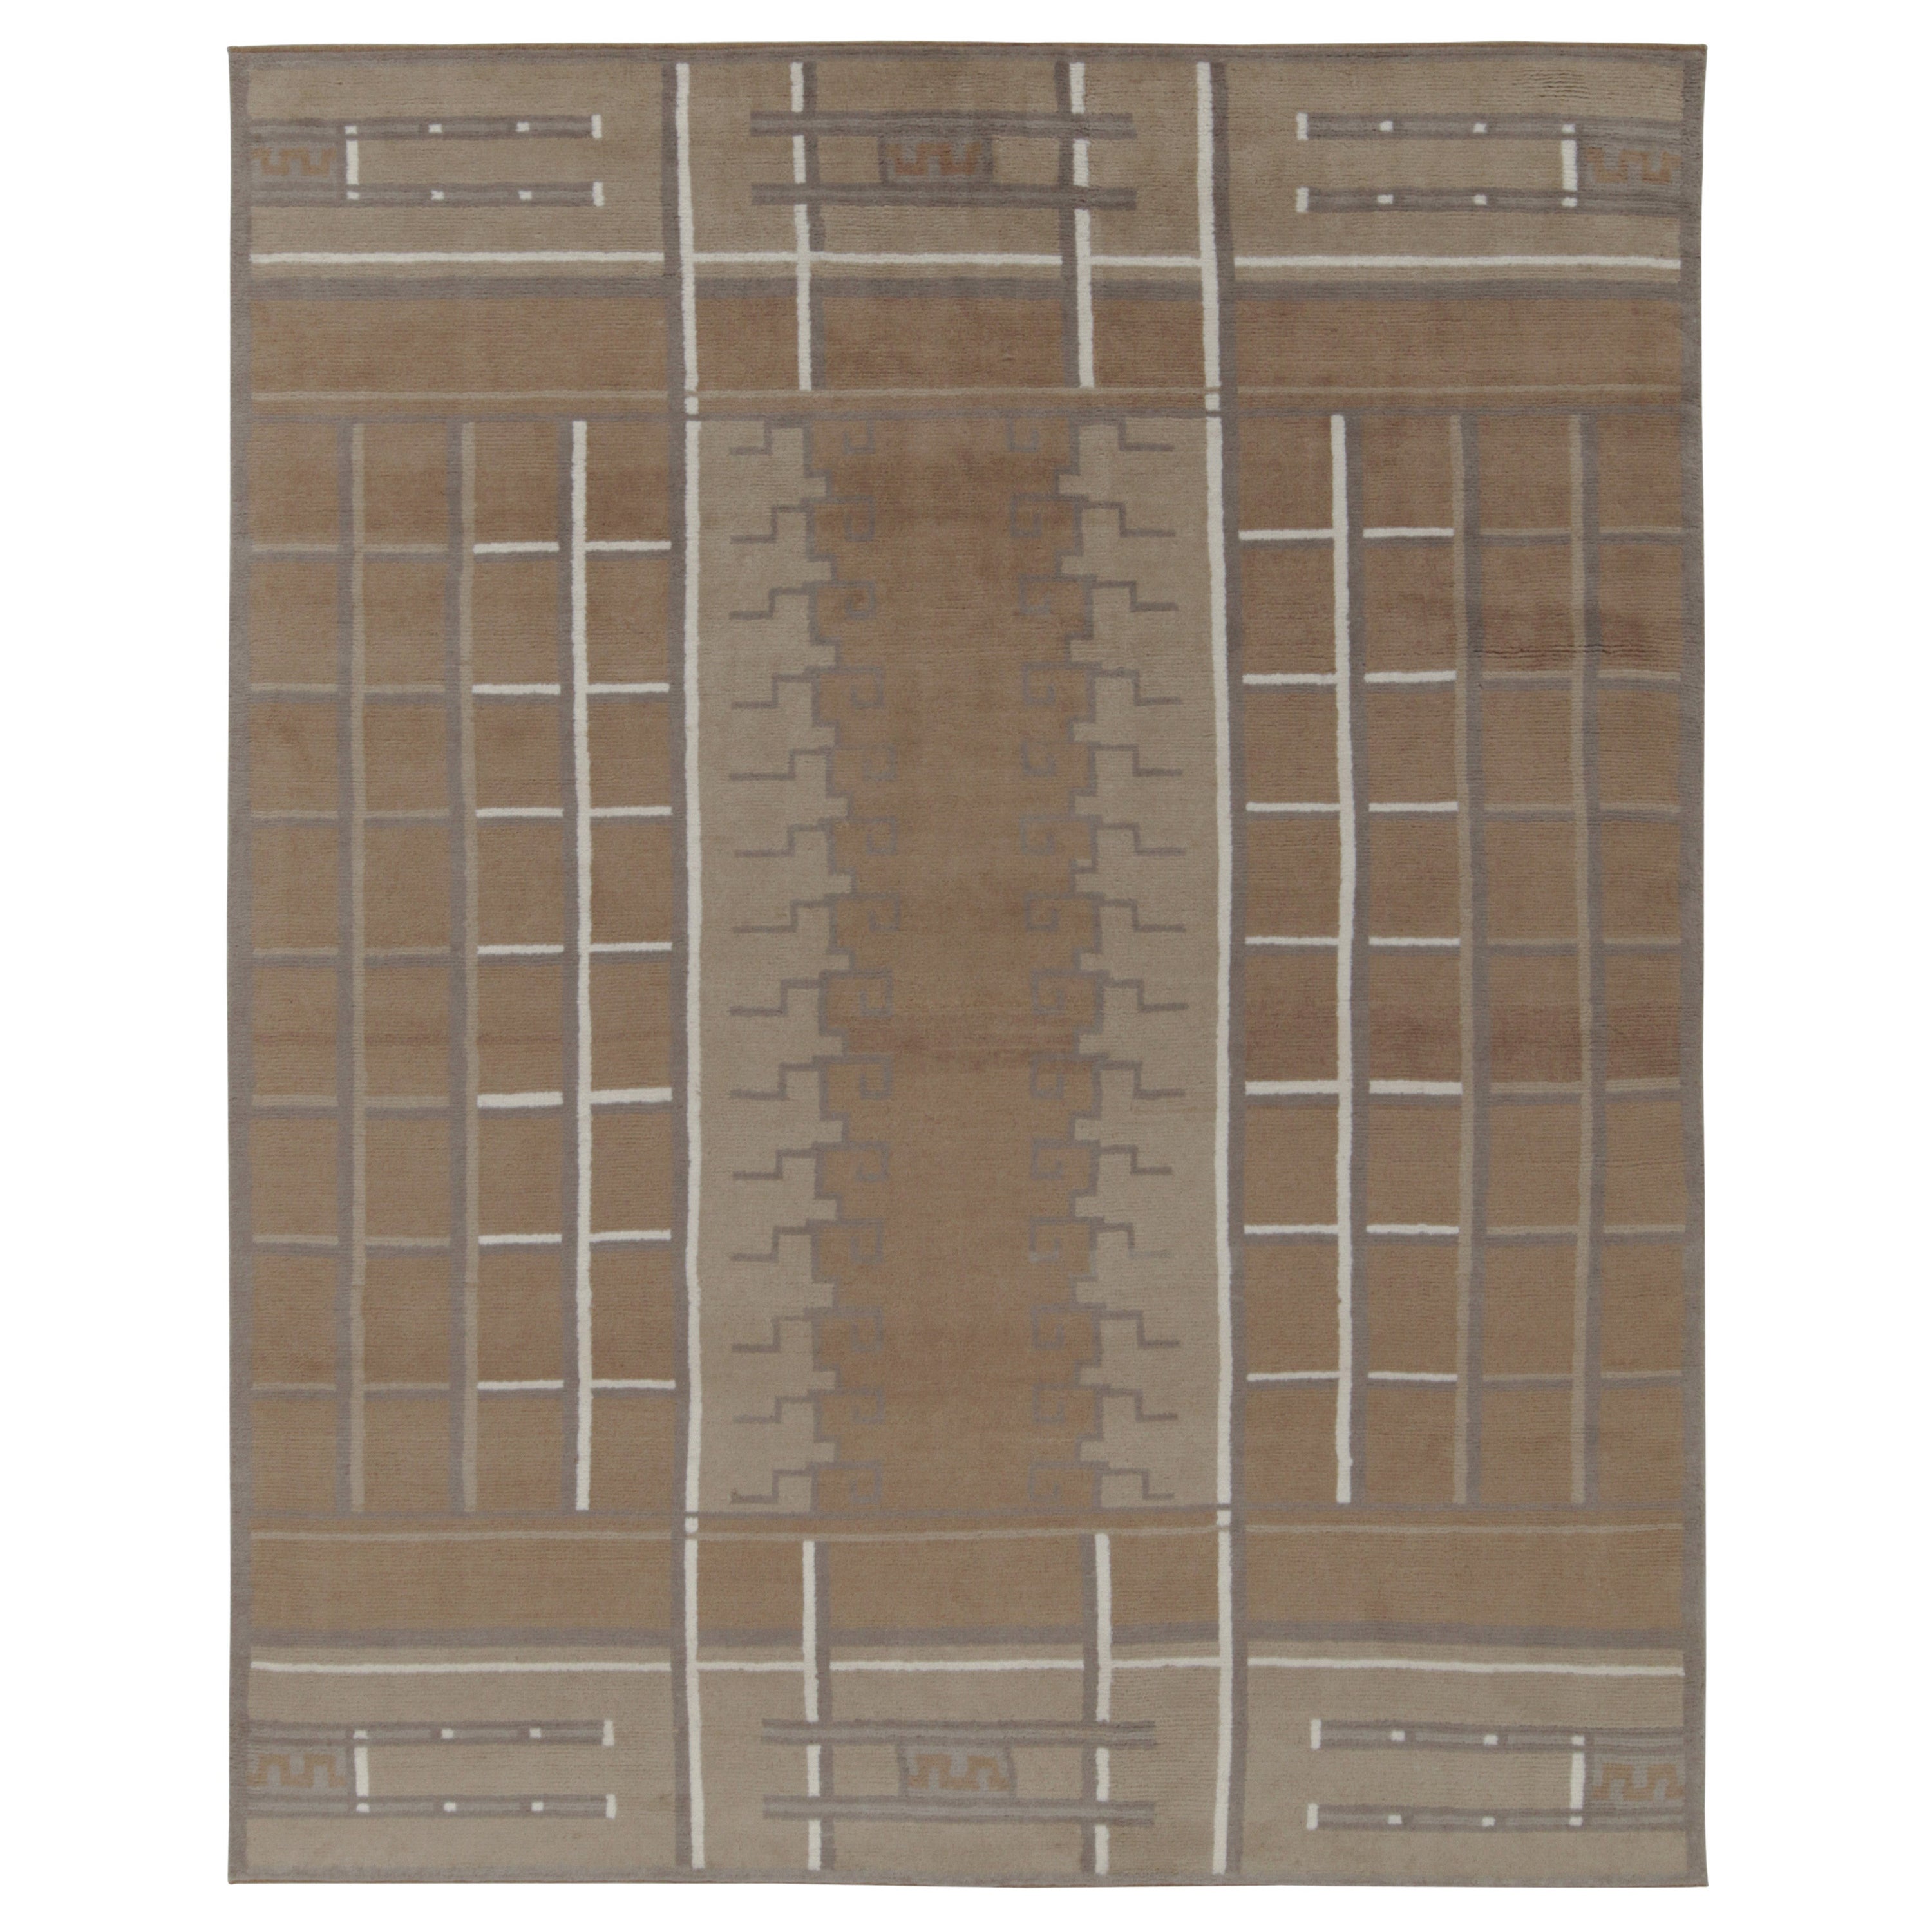 Rug & Kilim’s Swedish Deco style rug in Beige-Brown and Gray Geometric Patterns For Sale